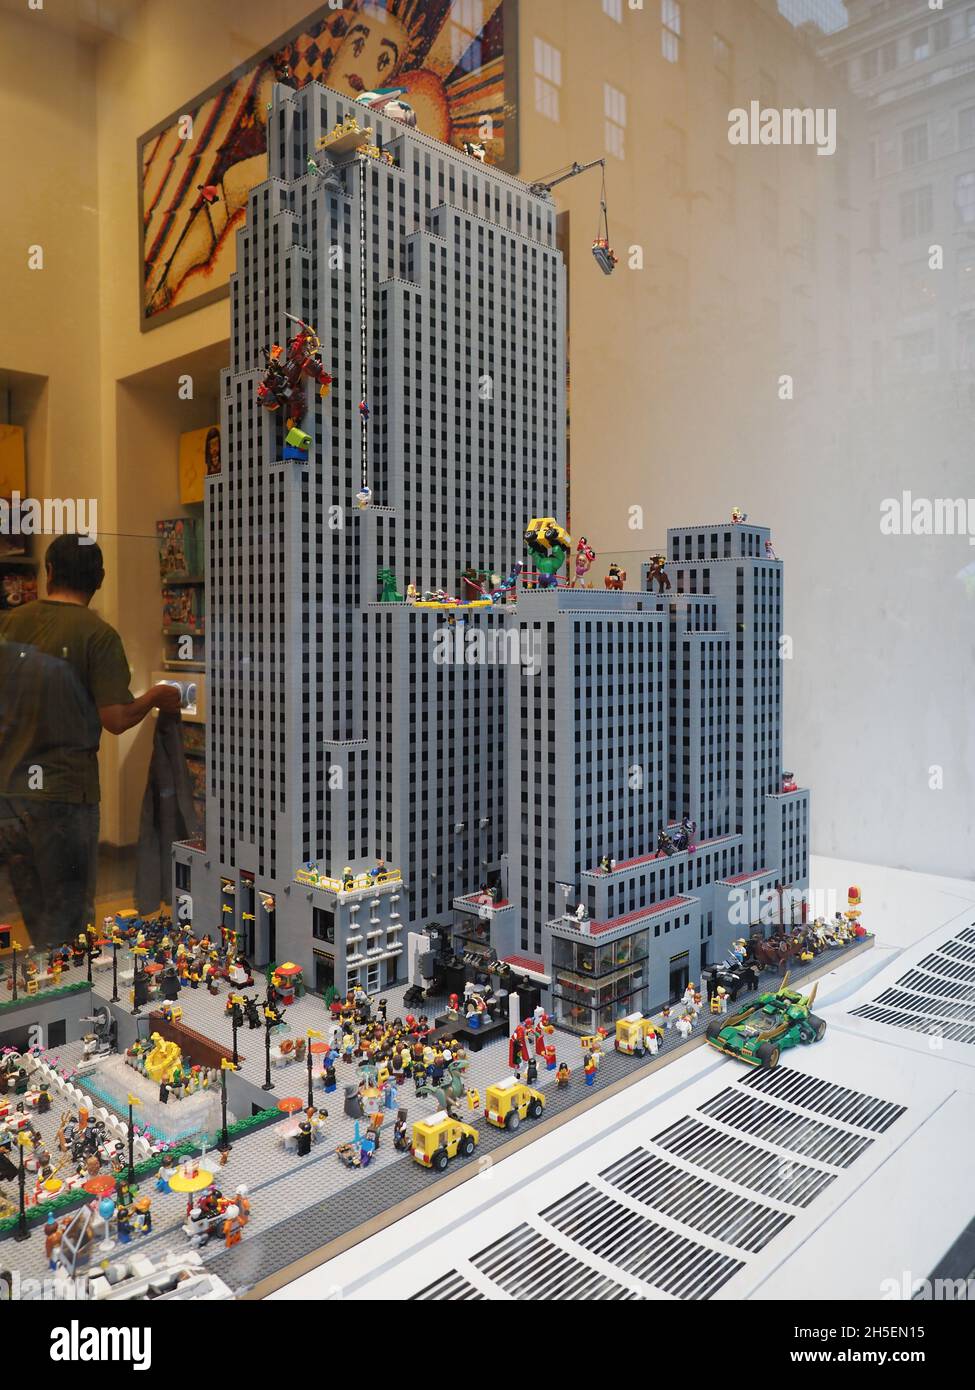 Recreation of the Rockefeller Center in the display of the Lego Store  situated in New York City Stock Photo - Alamy